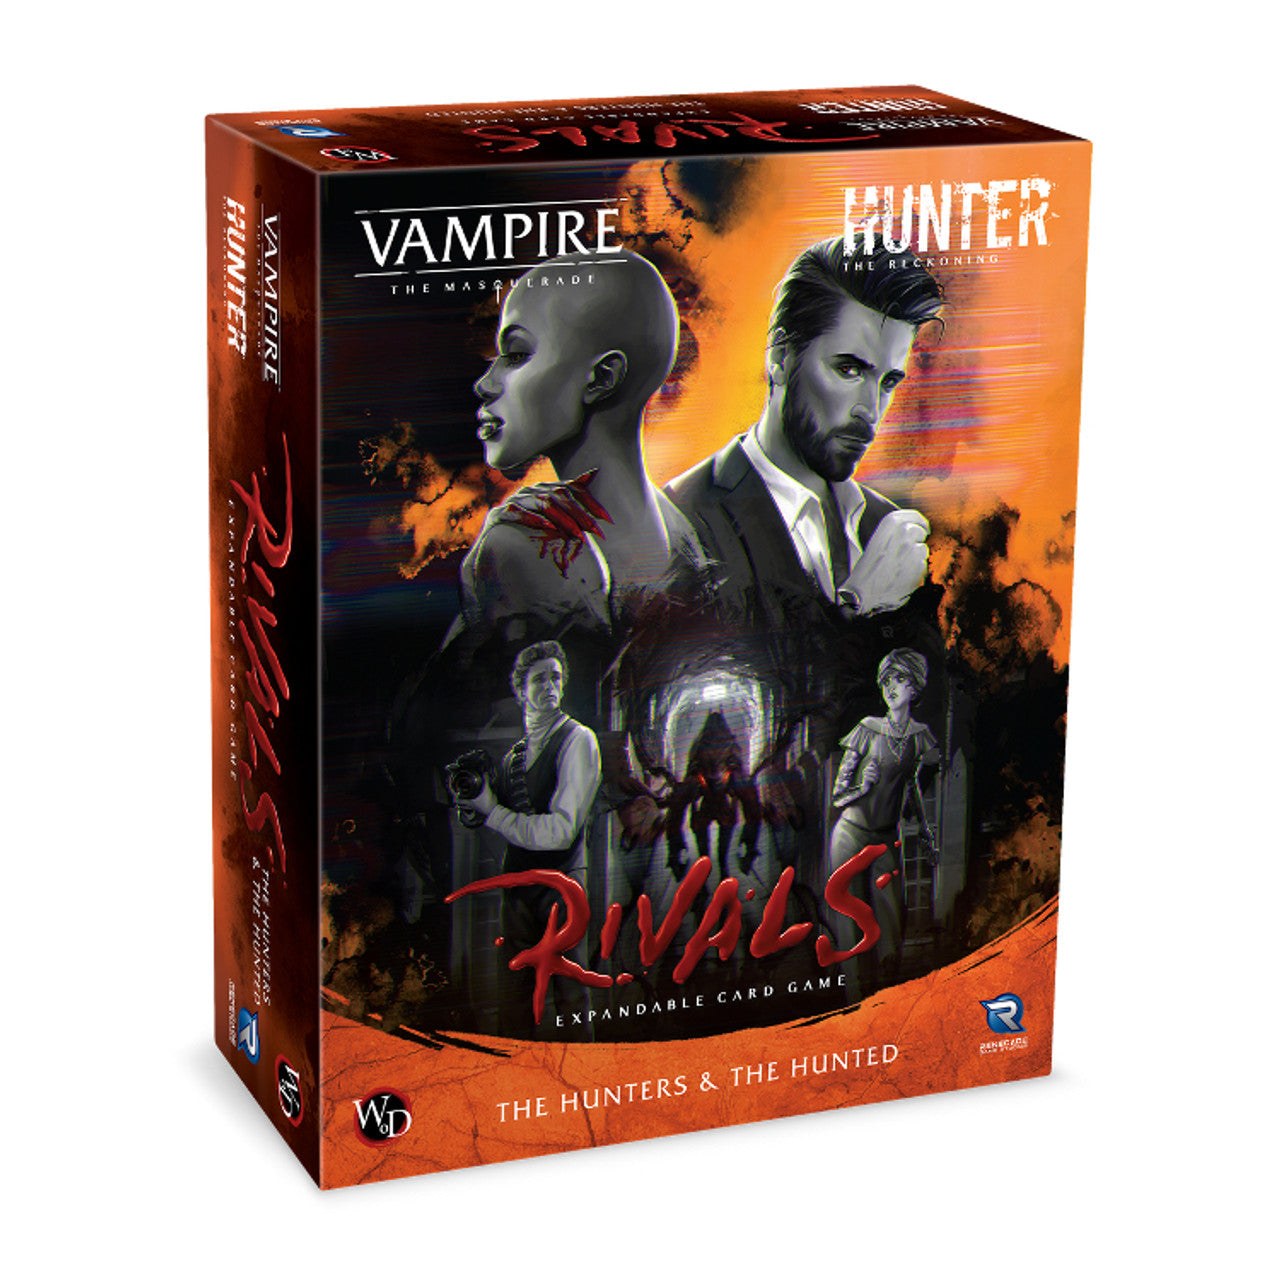 (BSG Certified USED) Vampire: The Masquerade/ Hunter: The Reckoning - Rivals: The Hunters & The Hunted